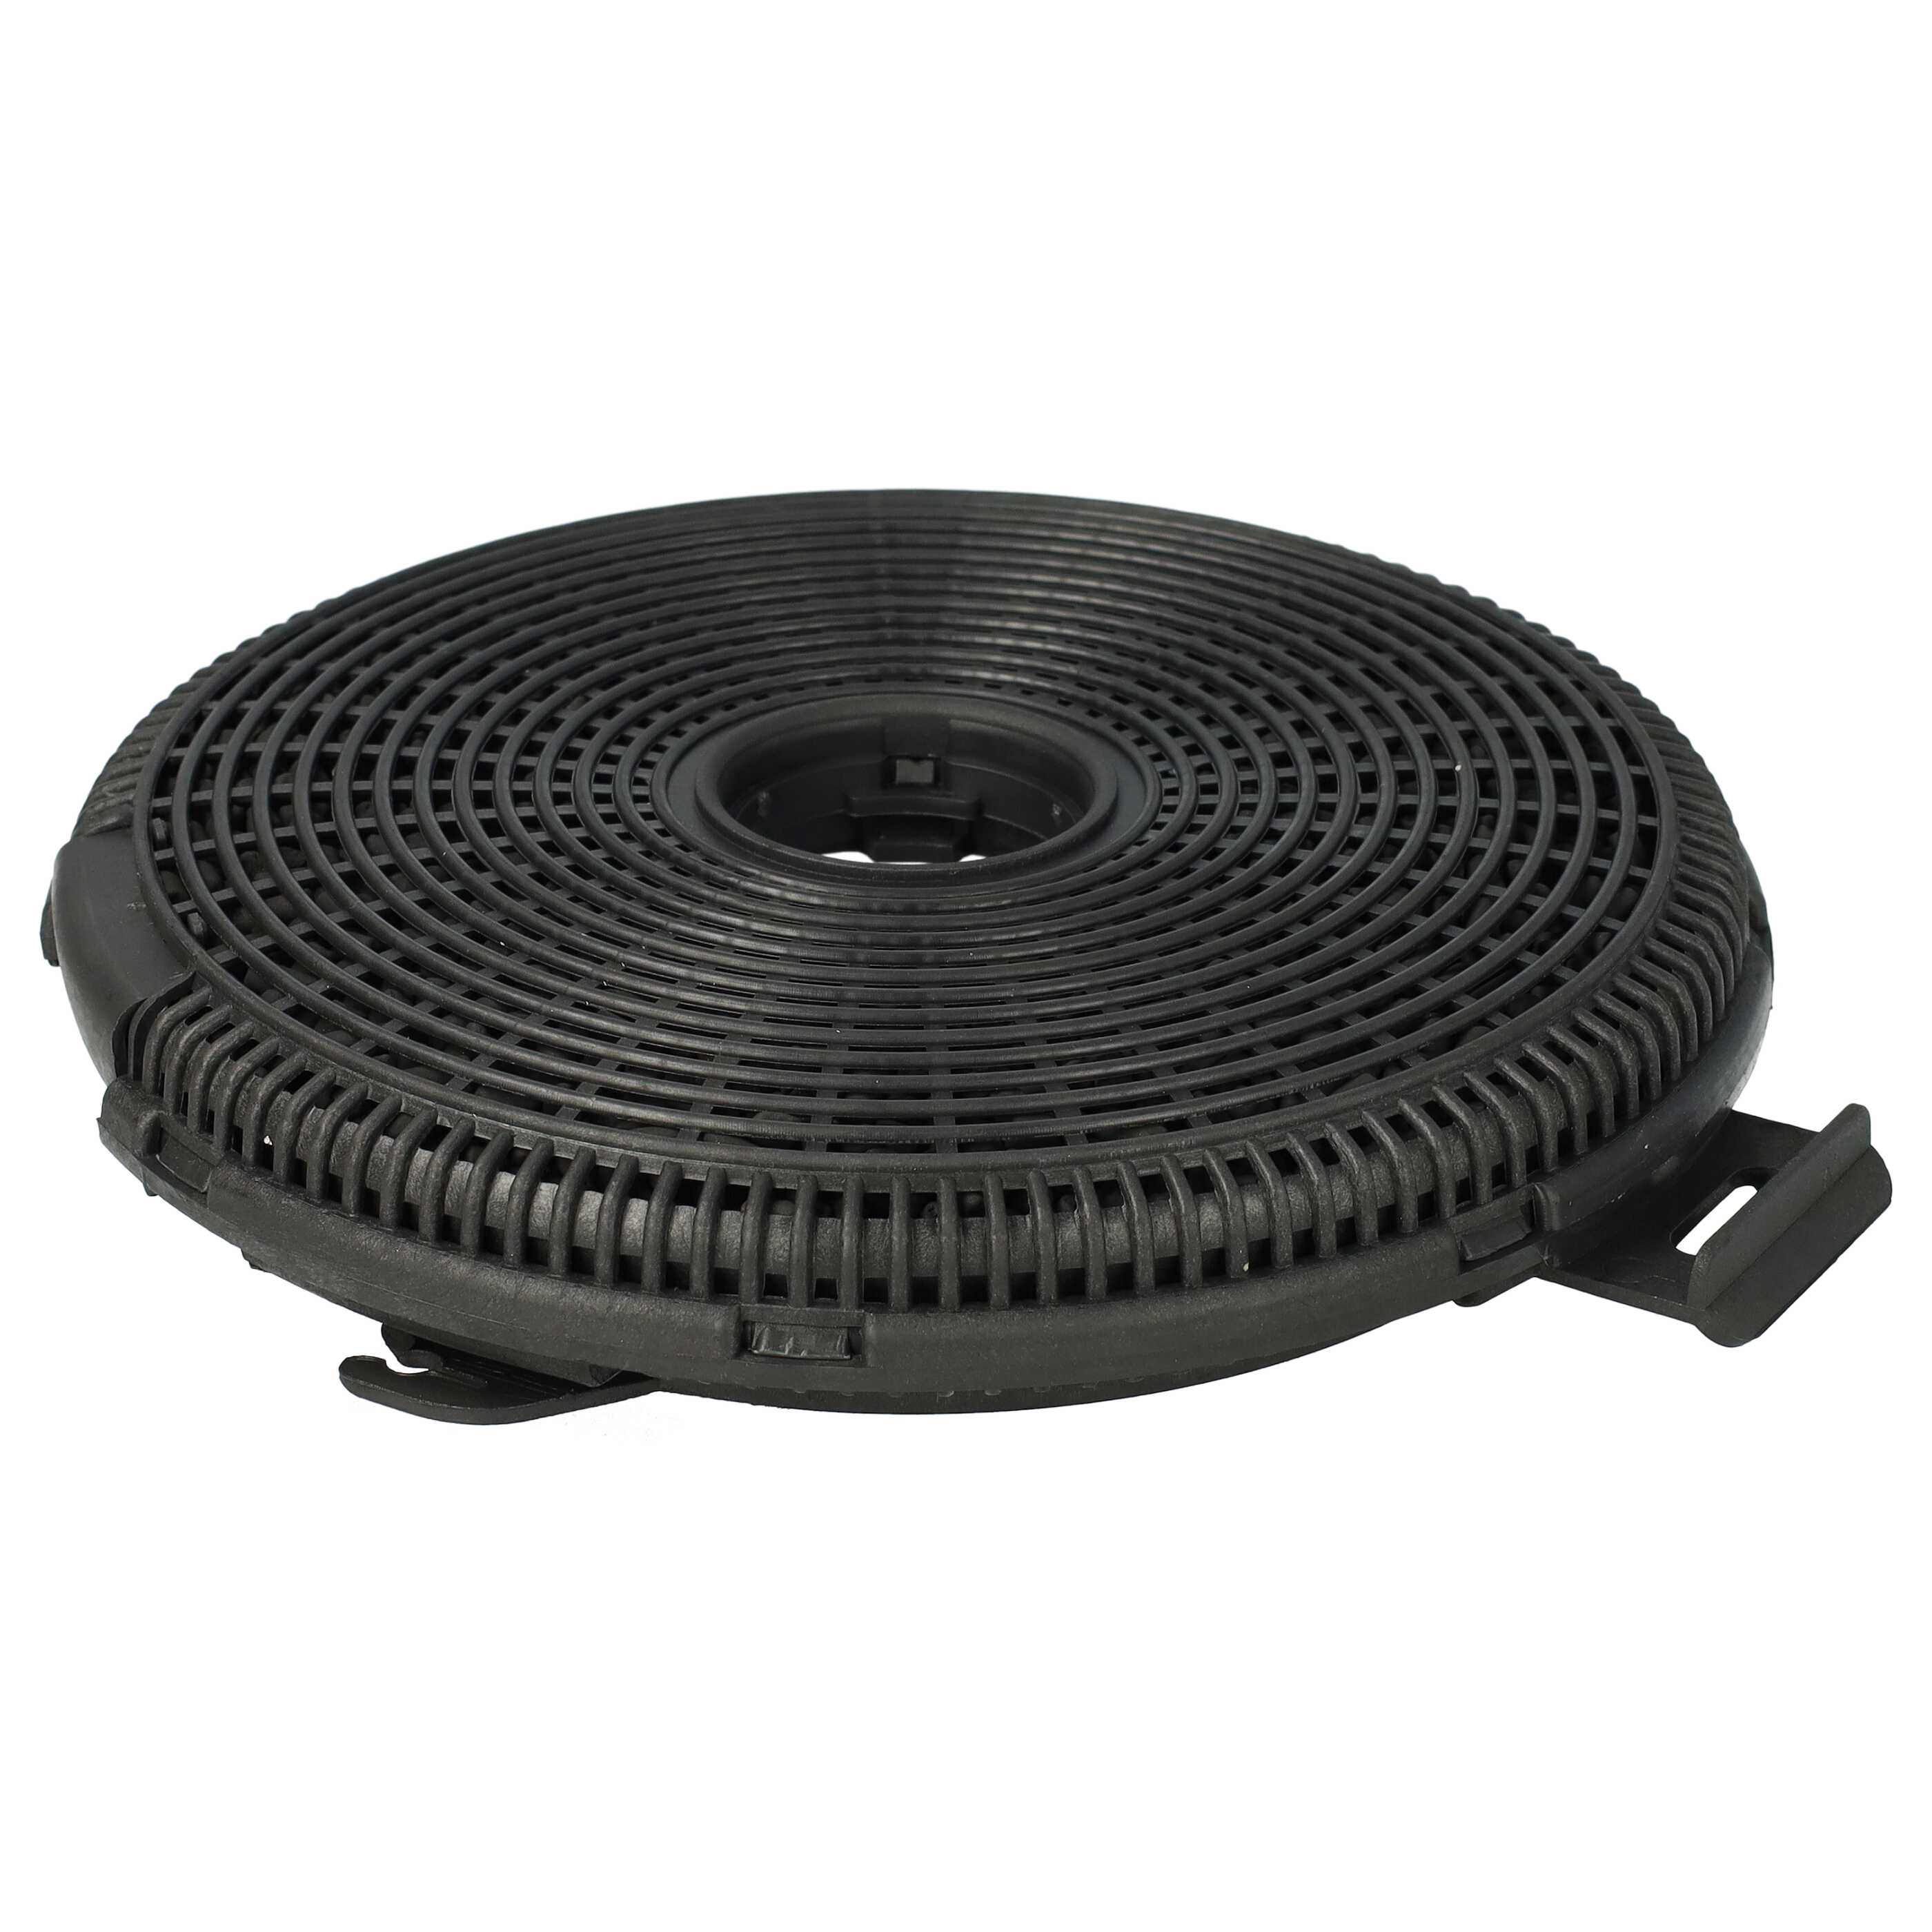 Activated Carbon Filter as Replacement for Küppersbusch ZUB 881 for Teka Hob etc. - 20 cm